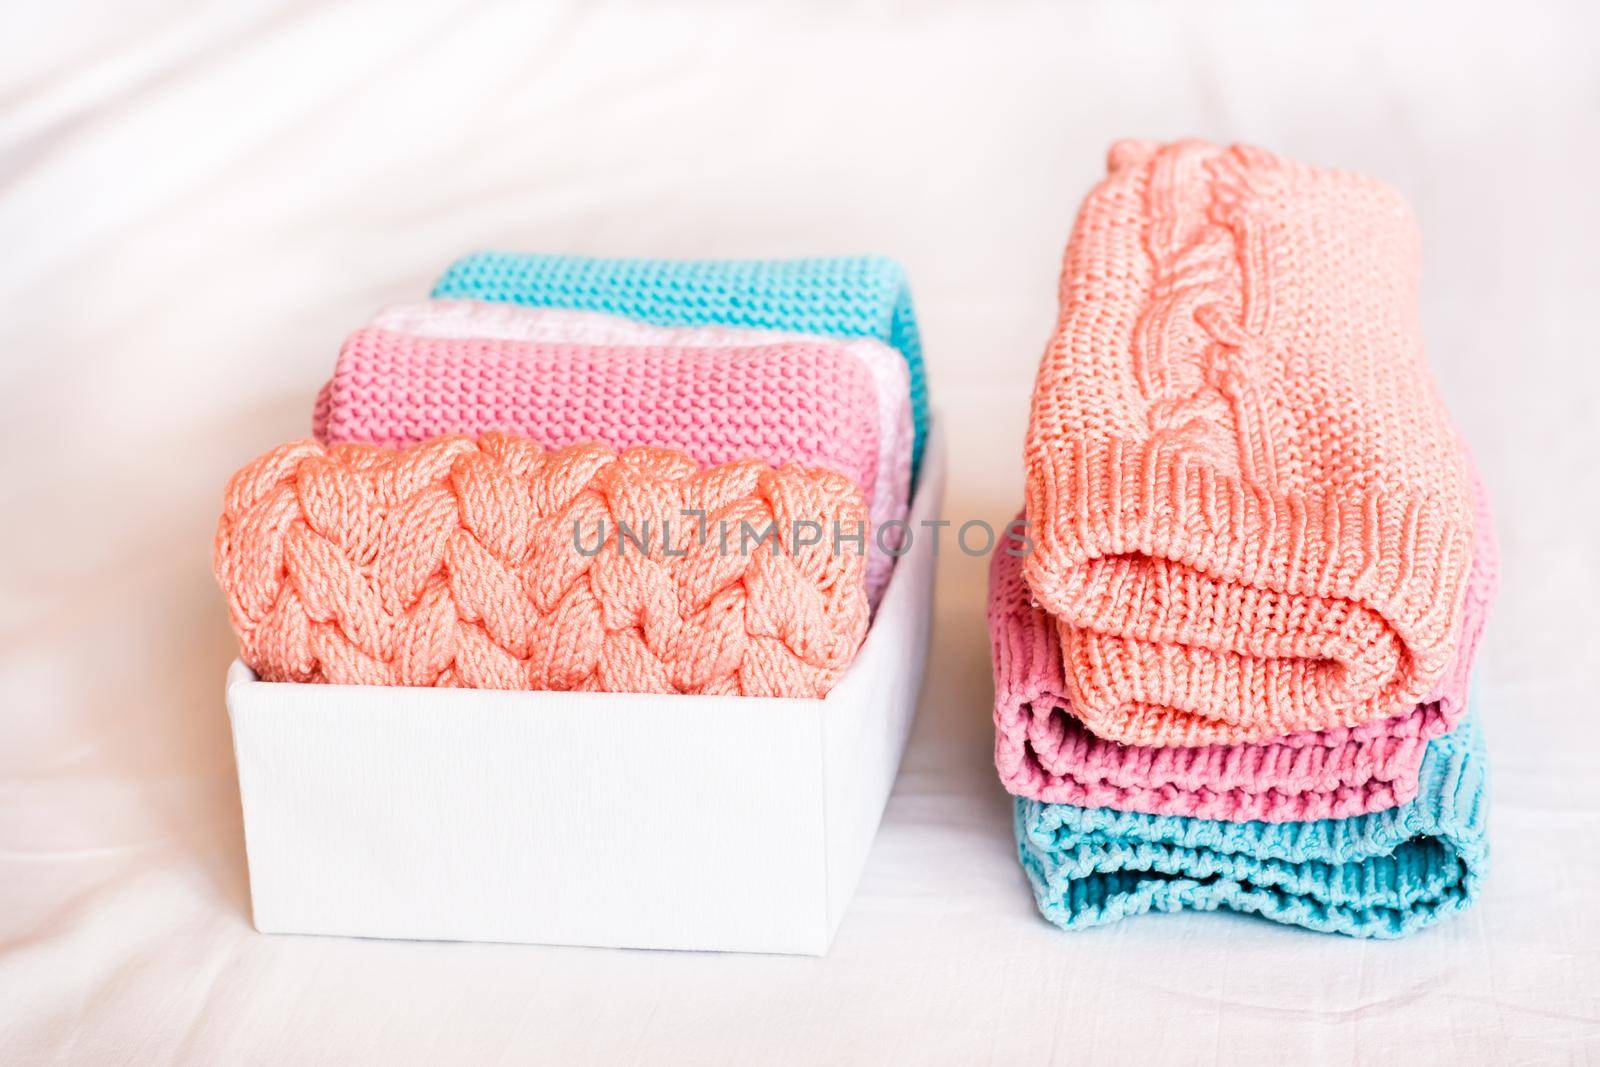 Organization and order. A stack of knitted clothes next to a box of neatly folded items